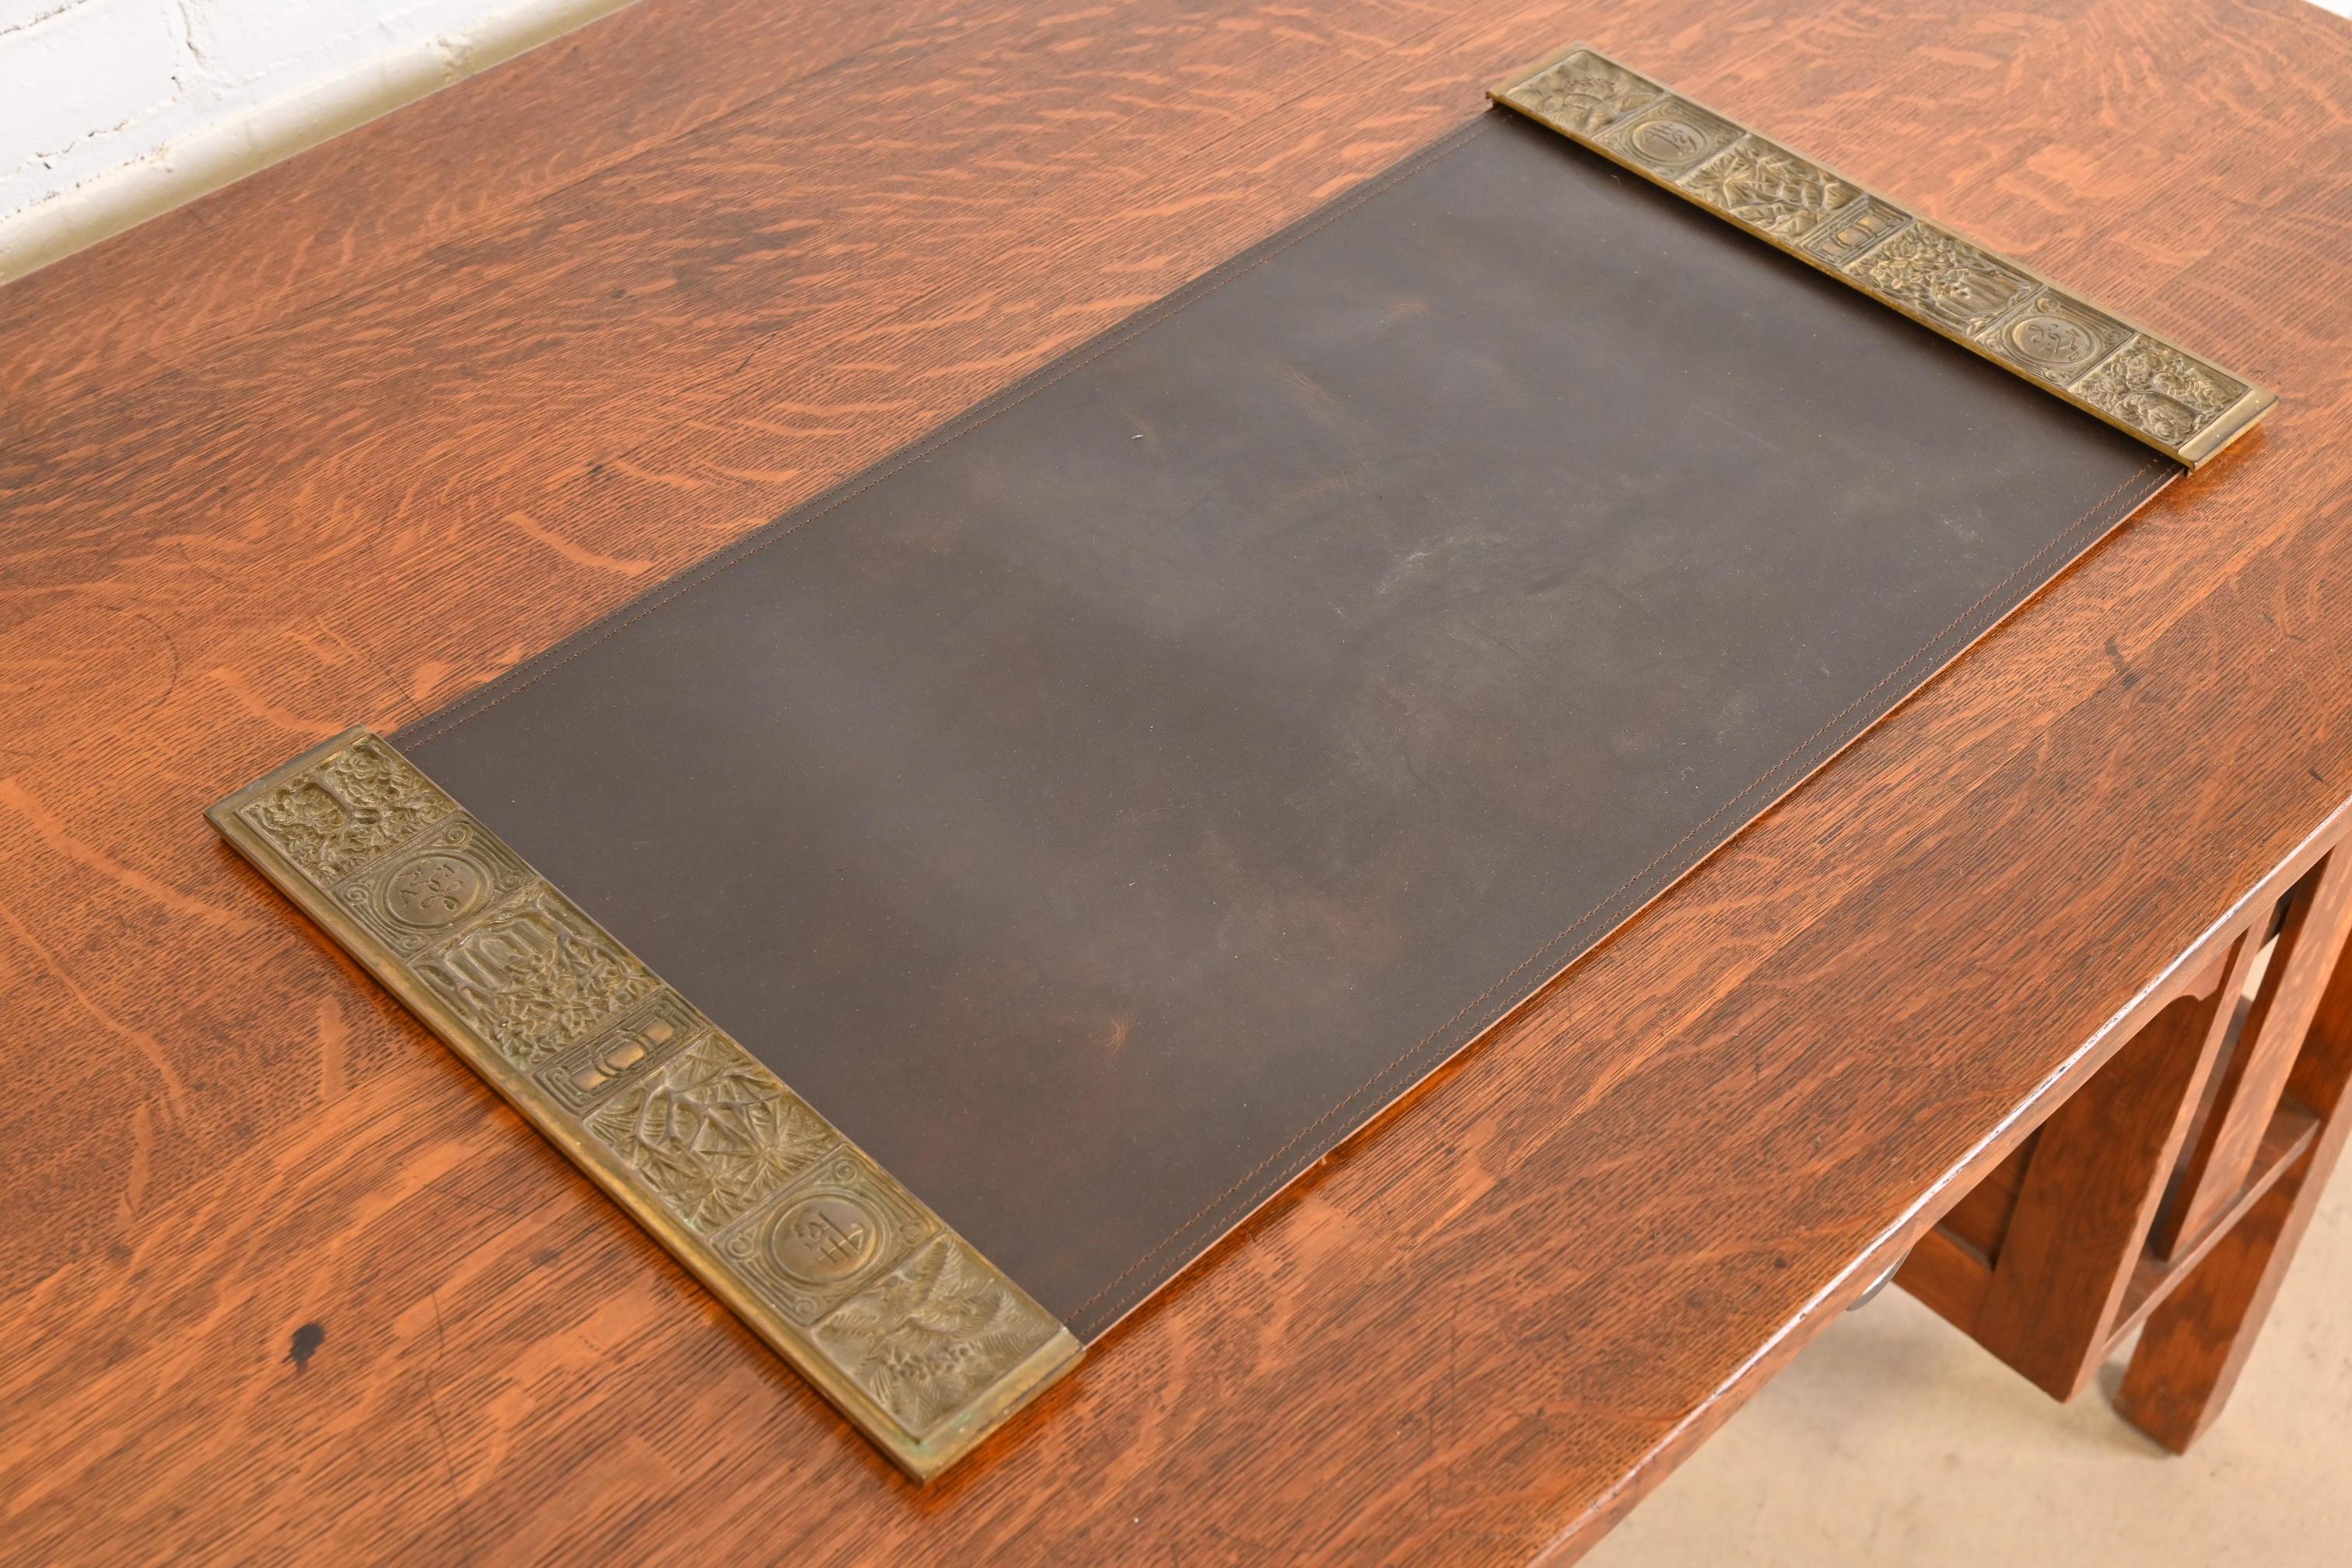 Tiffany Studios New York Bookmark Bronze Blotter Ends With Leather Desk Pad In Good Condition For Sale In South Bend, IN